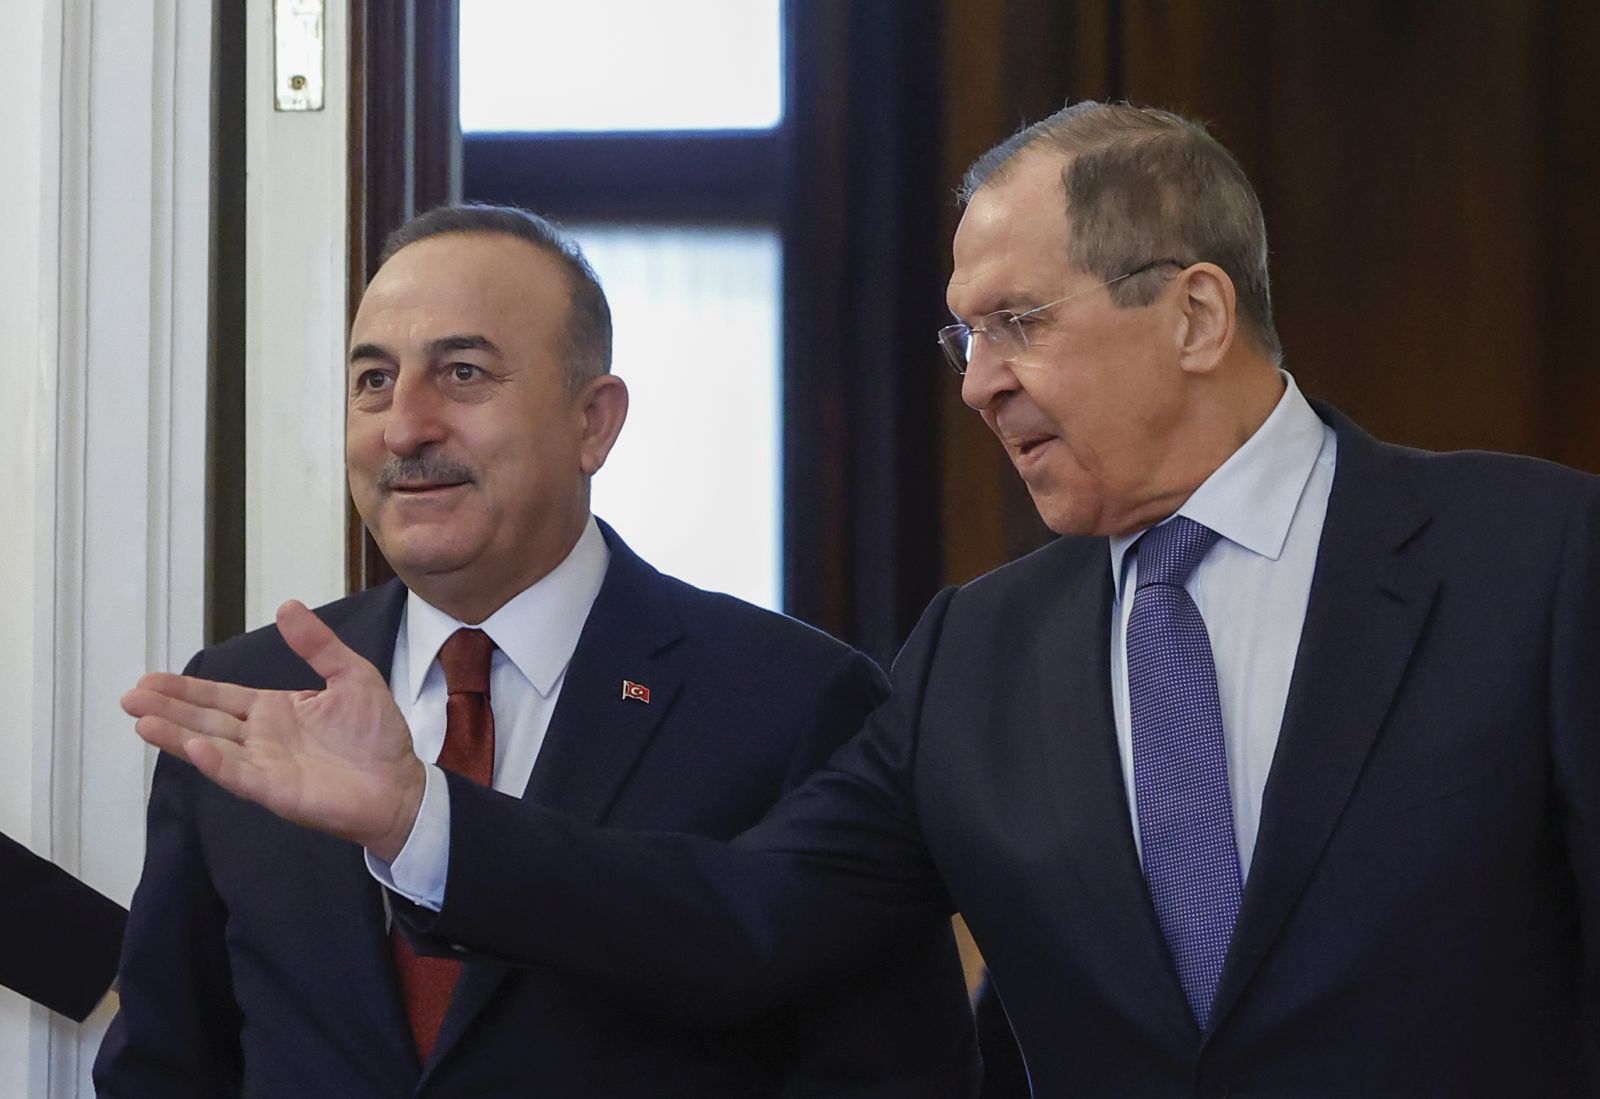 epa09828461 Russian Foreign Minister Sergei Lavrov (R) and Turkish Foreign Minister Mevlut Cavusoglu (L) enter a hall during a meeting in Moscow, Russia, 16 March 2022. Turkish Foreign Minister is on a working visit to Moscow.  EPA/MAXIM SHEMETOV / POOL